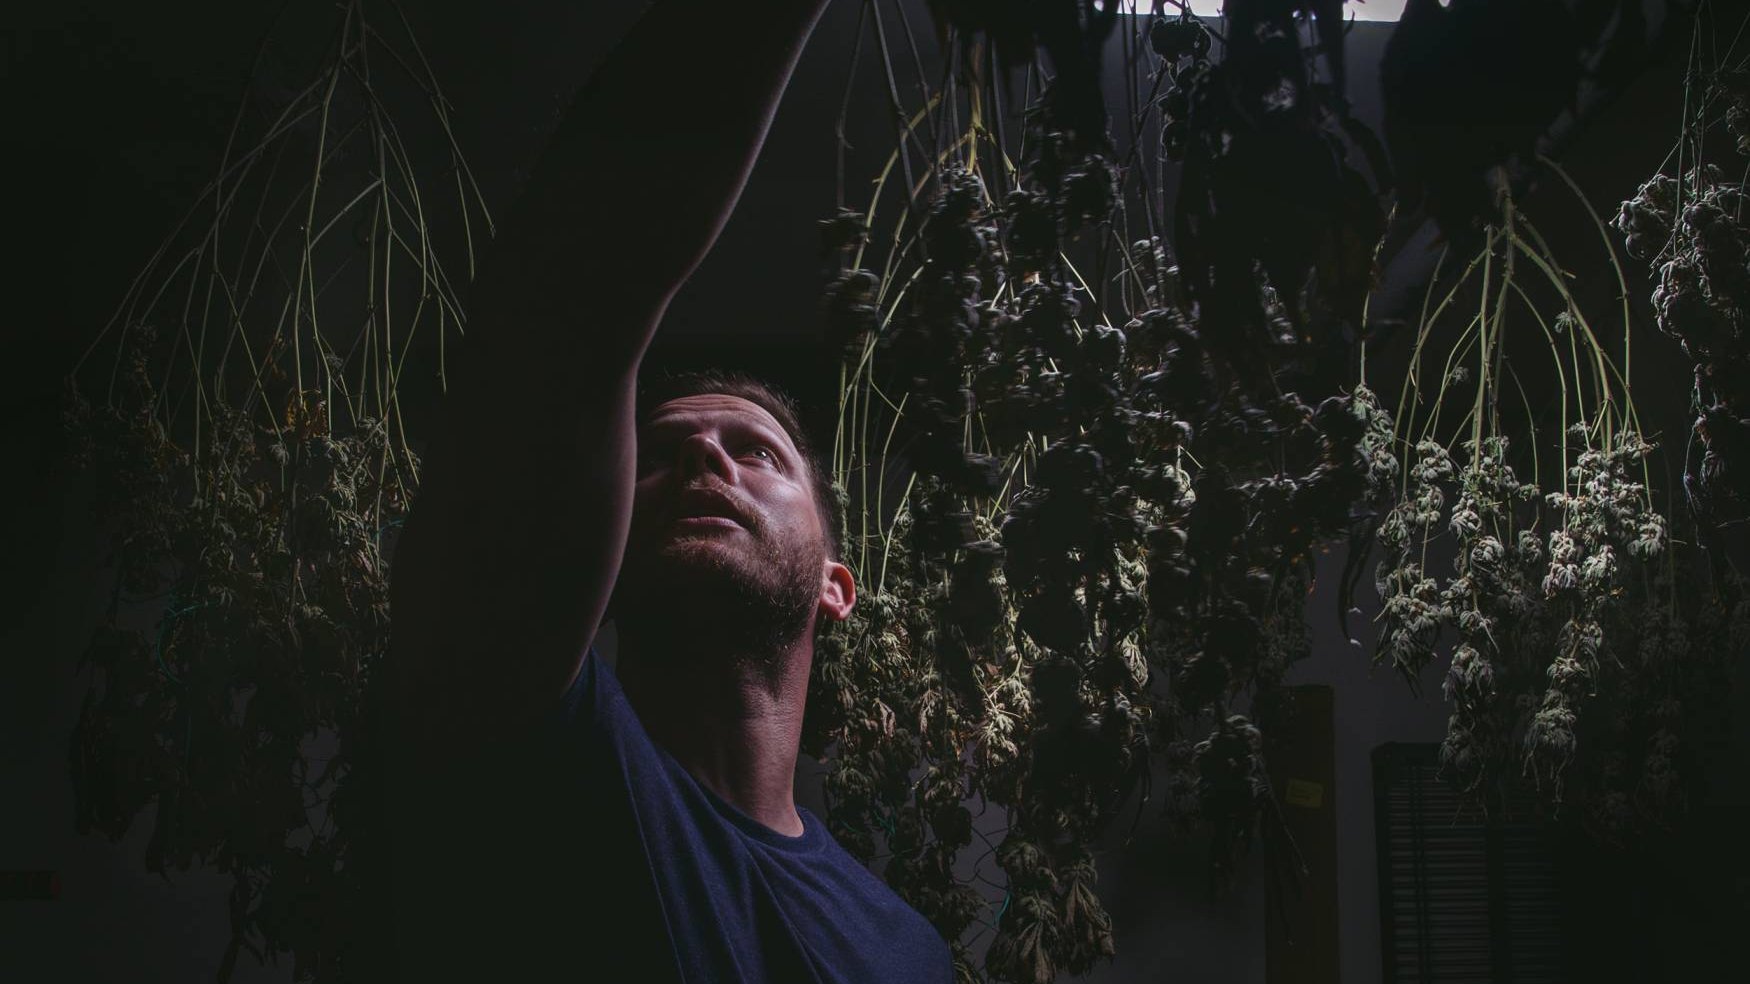 Nate Hanging Cannabis Plants